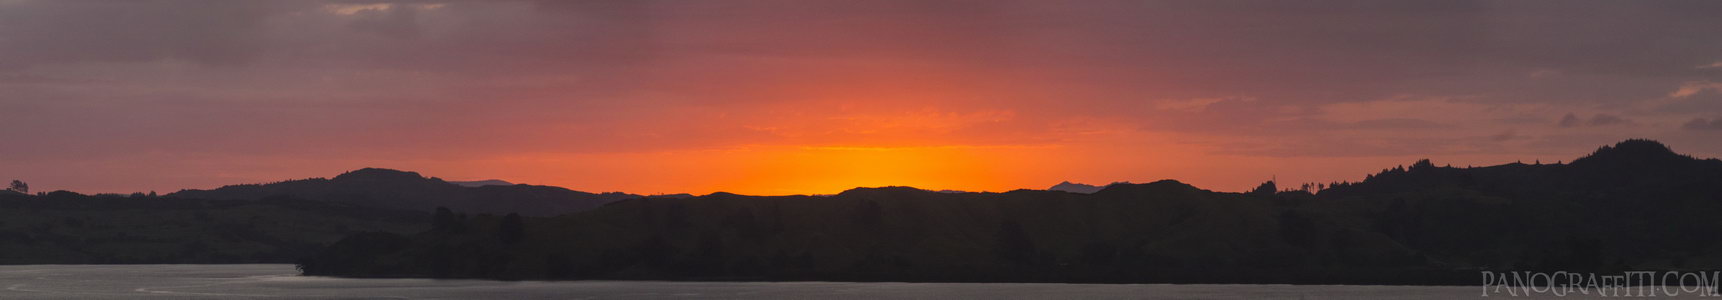 The Tree House Sunset - A beautiful sunset when staying at The Tree House Hostel in Kohukohu